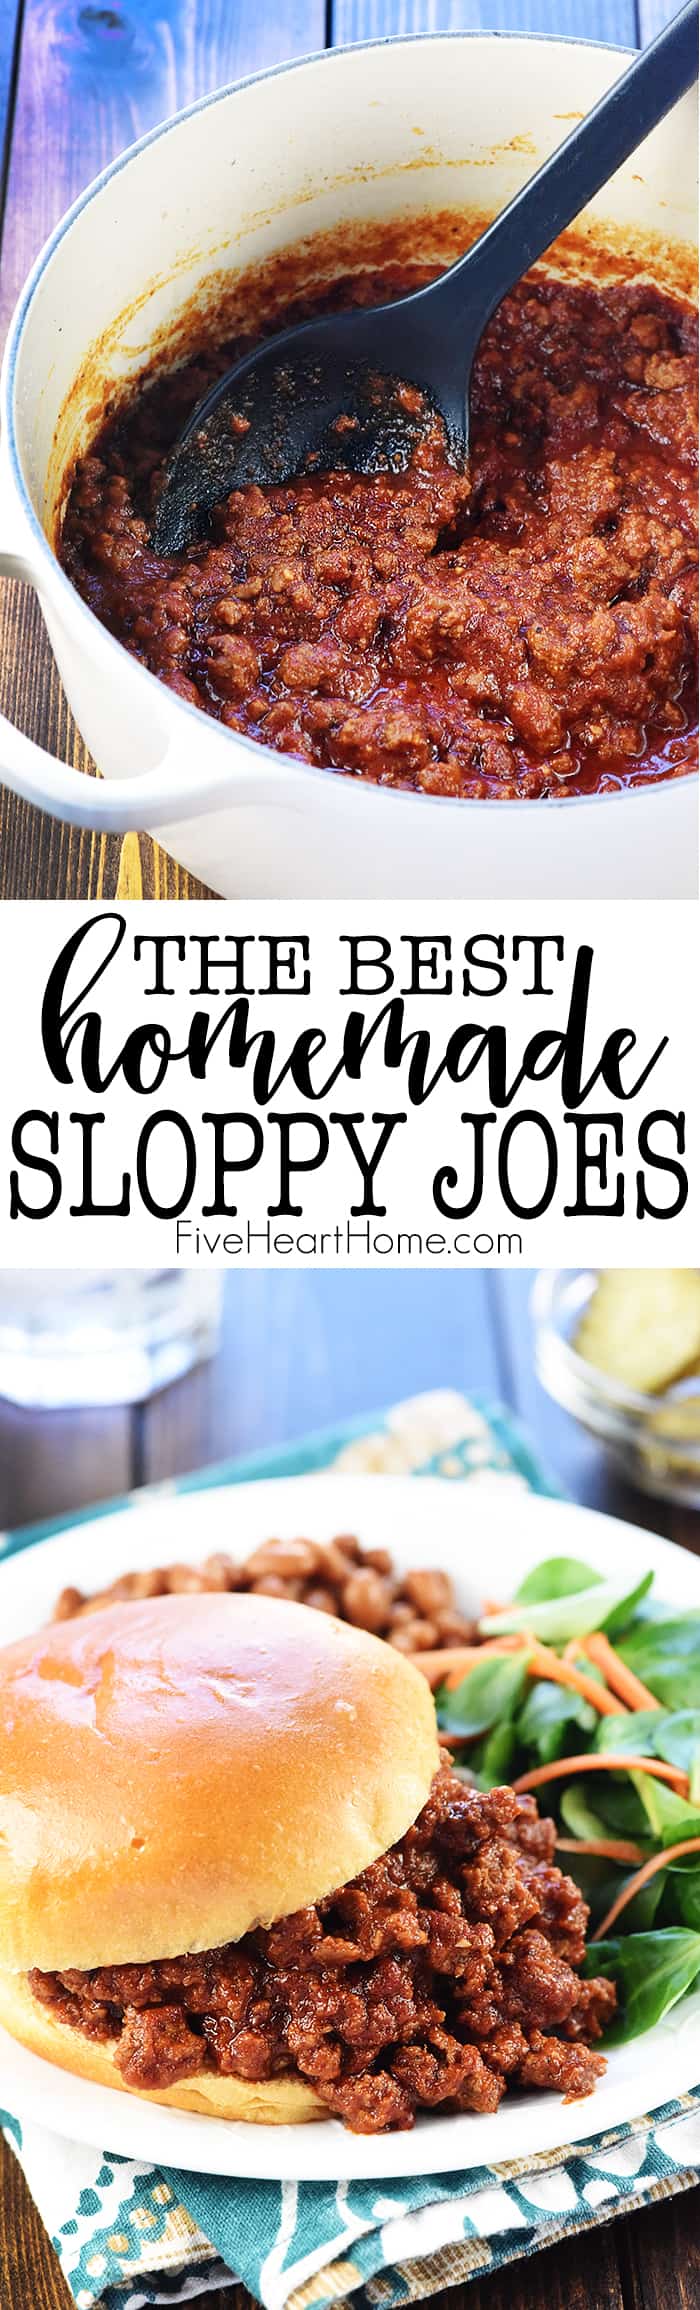 https://www.fivehearthome.com/wp-content/uploads/2017/11/The-Best-Homemade-Sloppy-Joes-Recipe-by-Five-Heart-Home_700pxCollage2.jpg